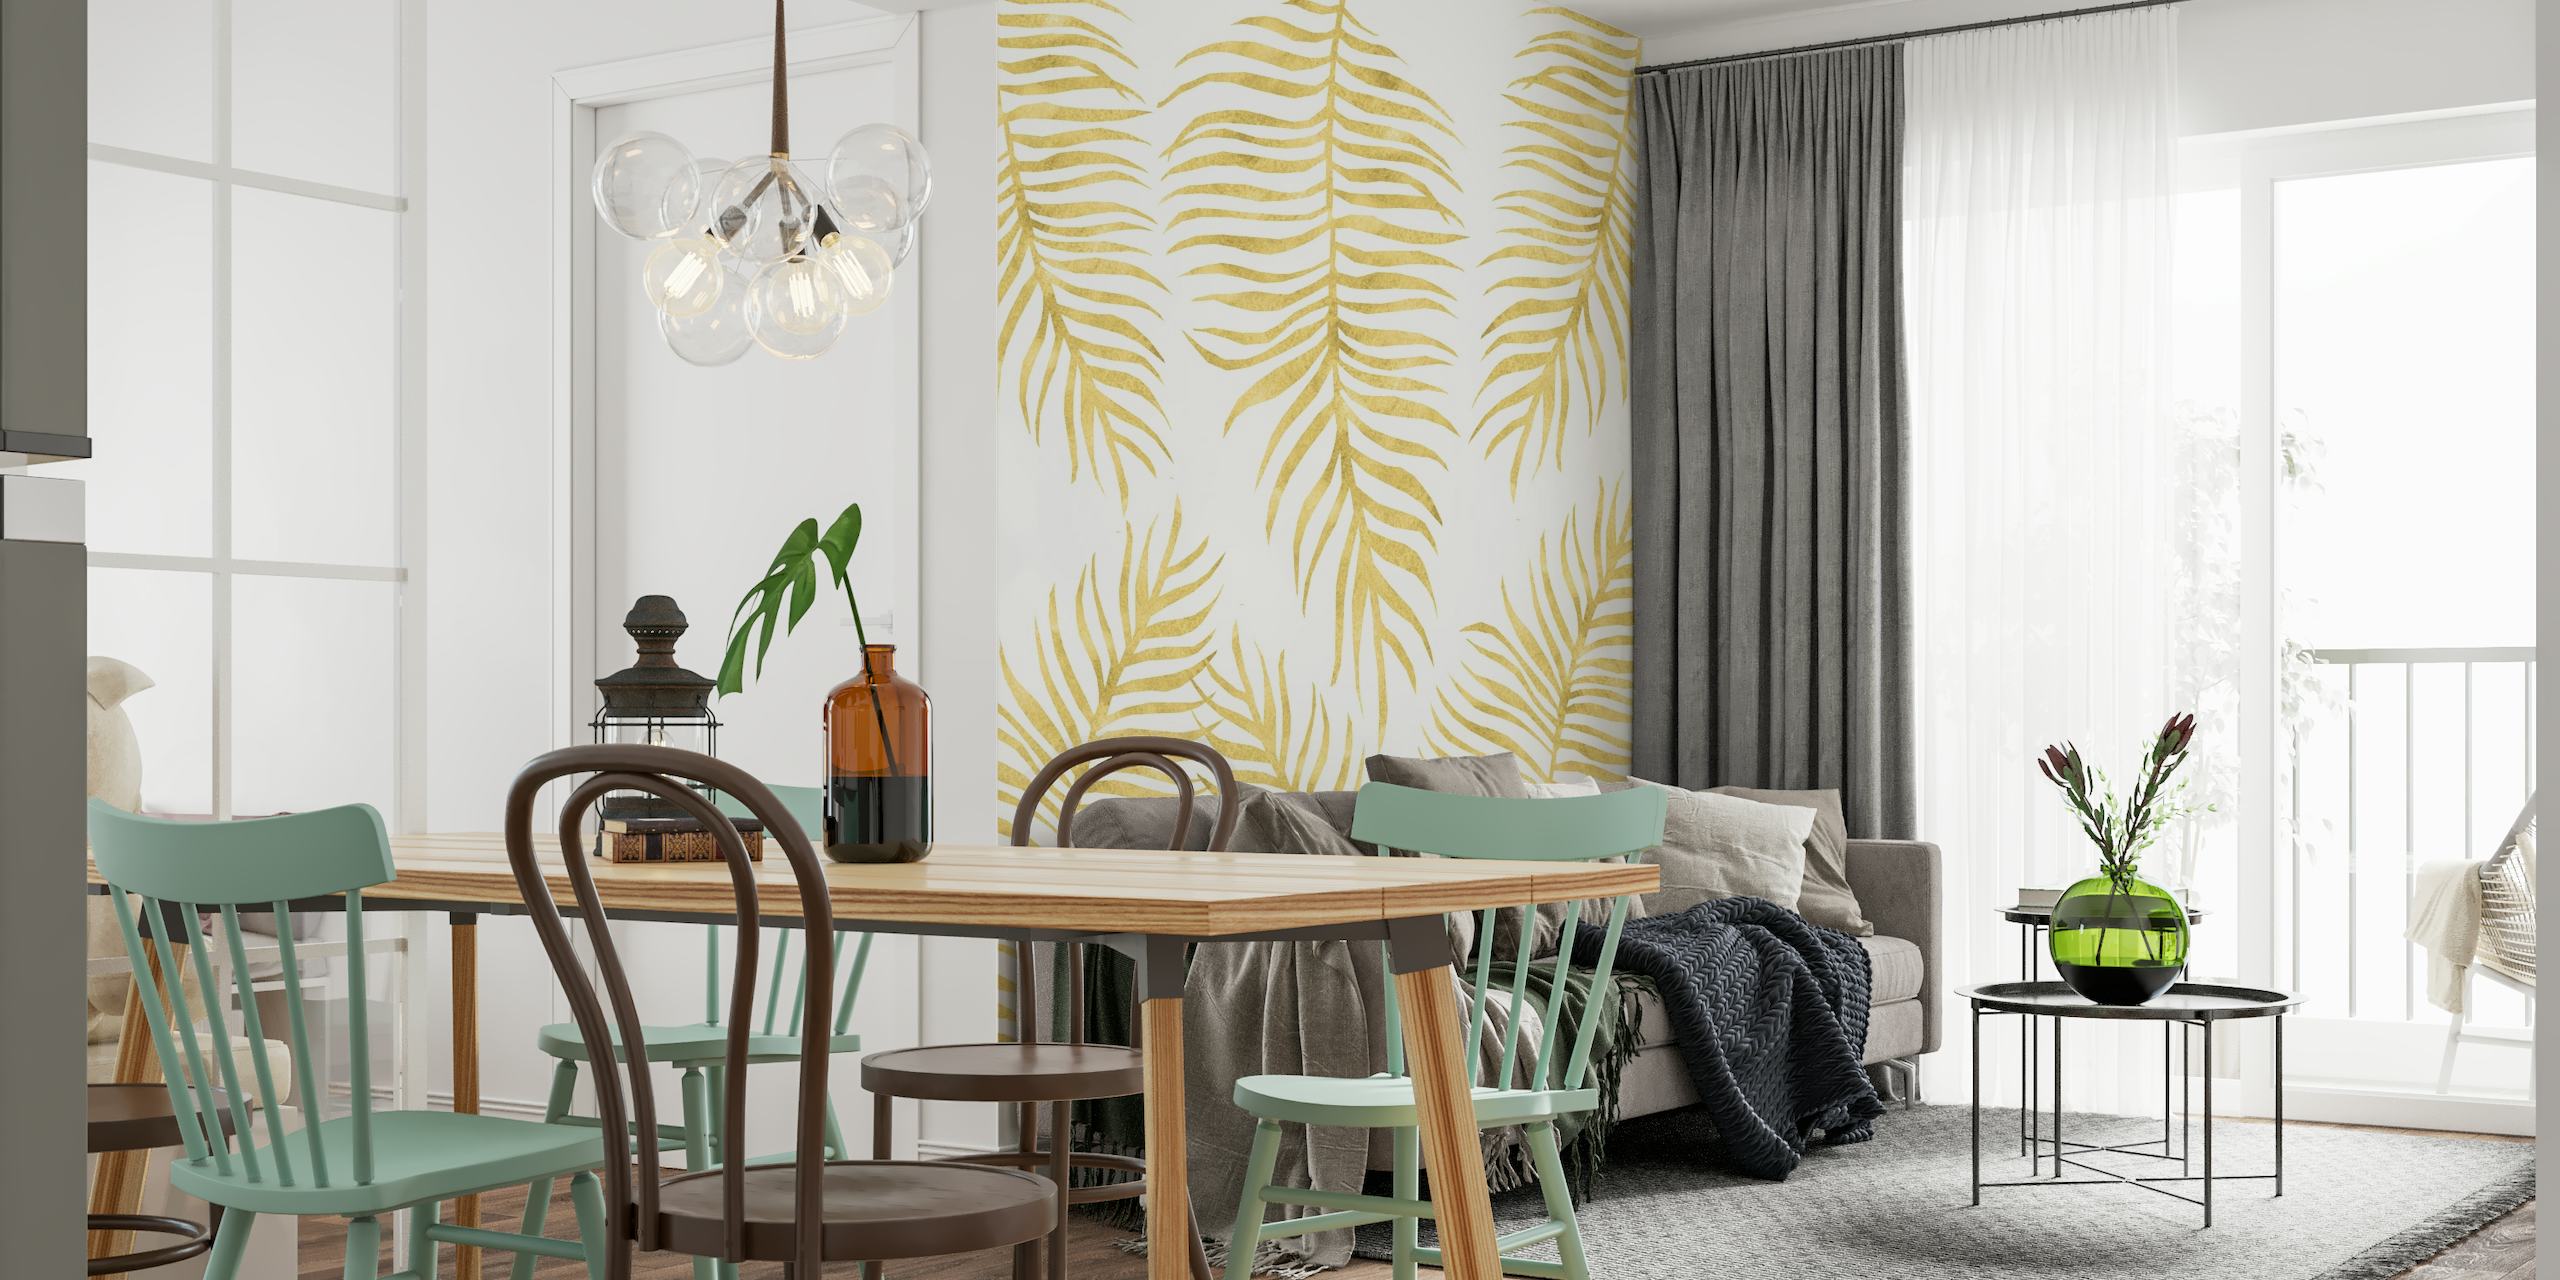 Picture of Happywall's Gold Fern Pattern Wallpaper Design